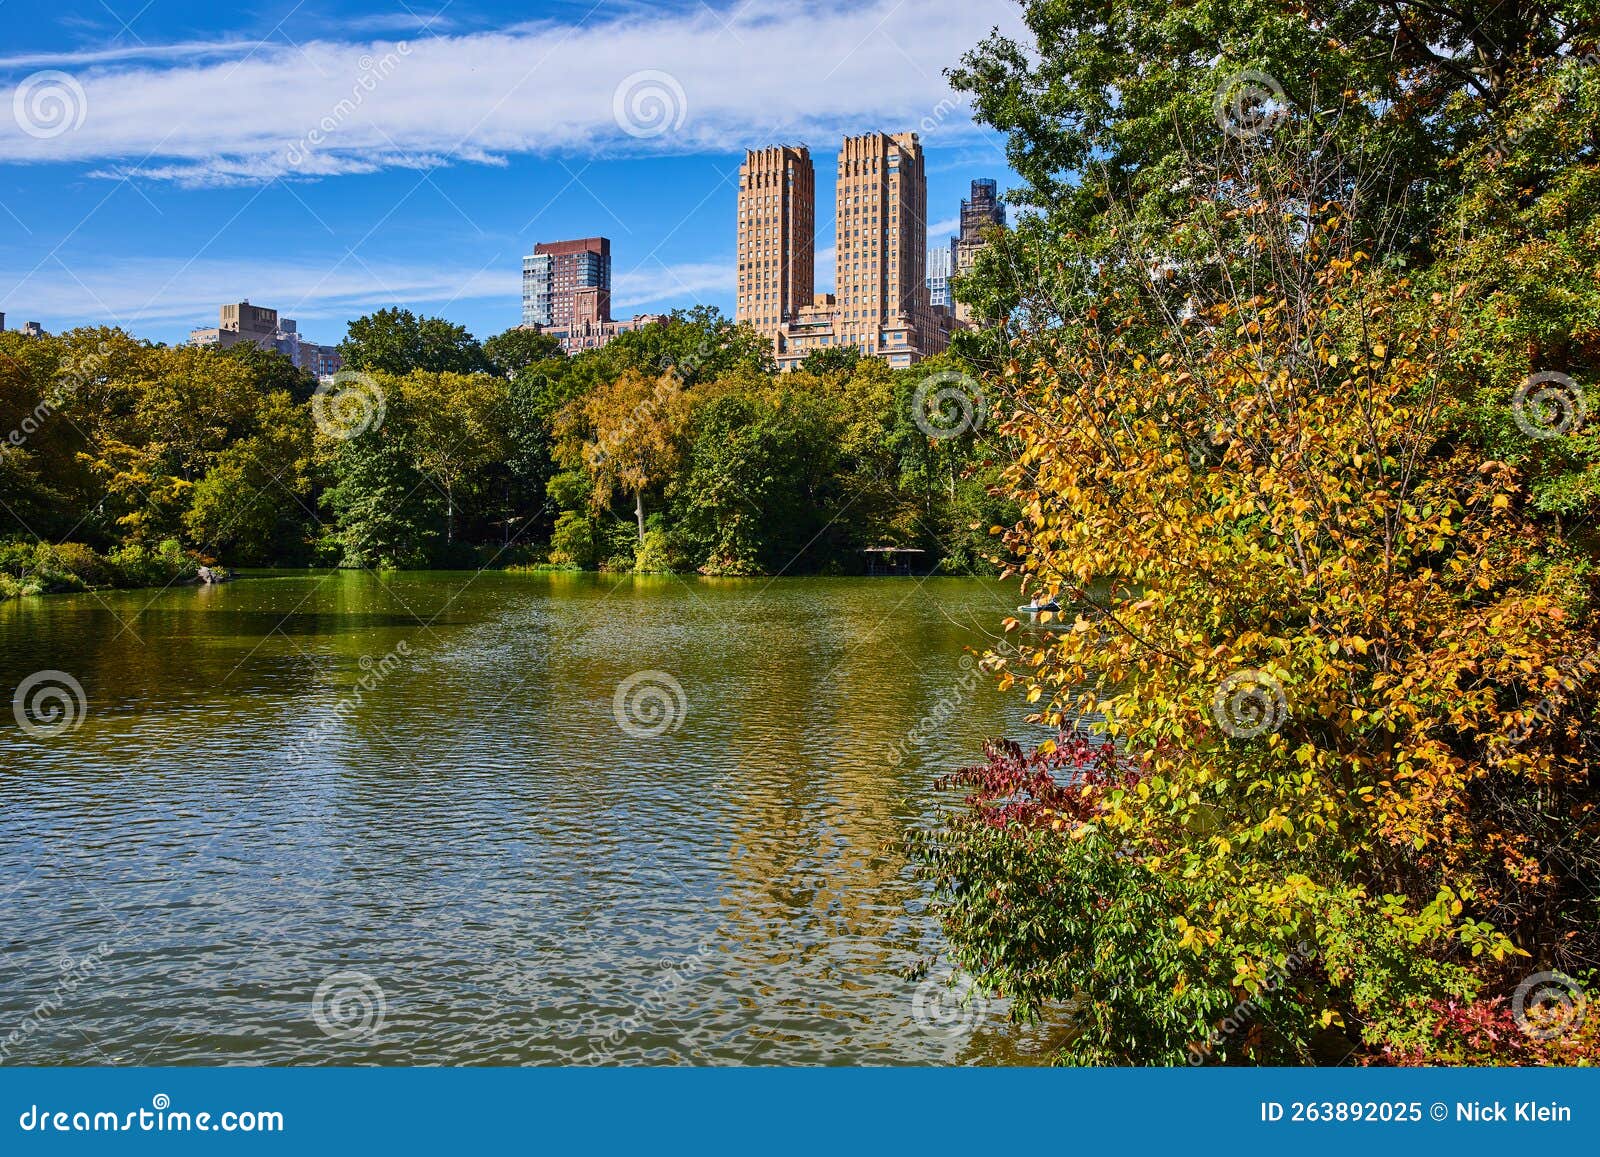 Pond and Forests Inside Central Park with New York City Towering ...